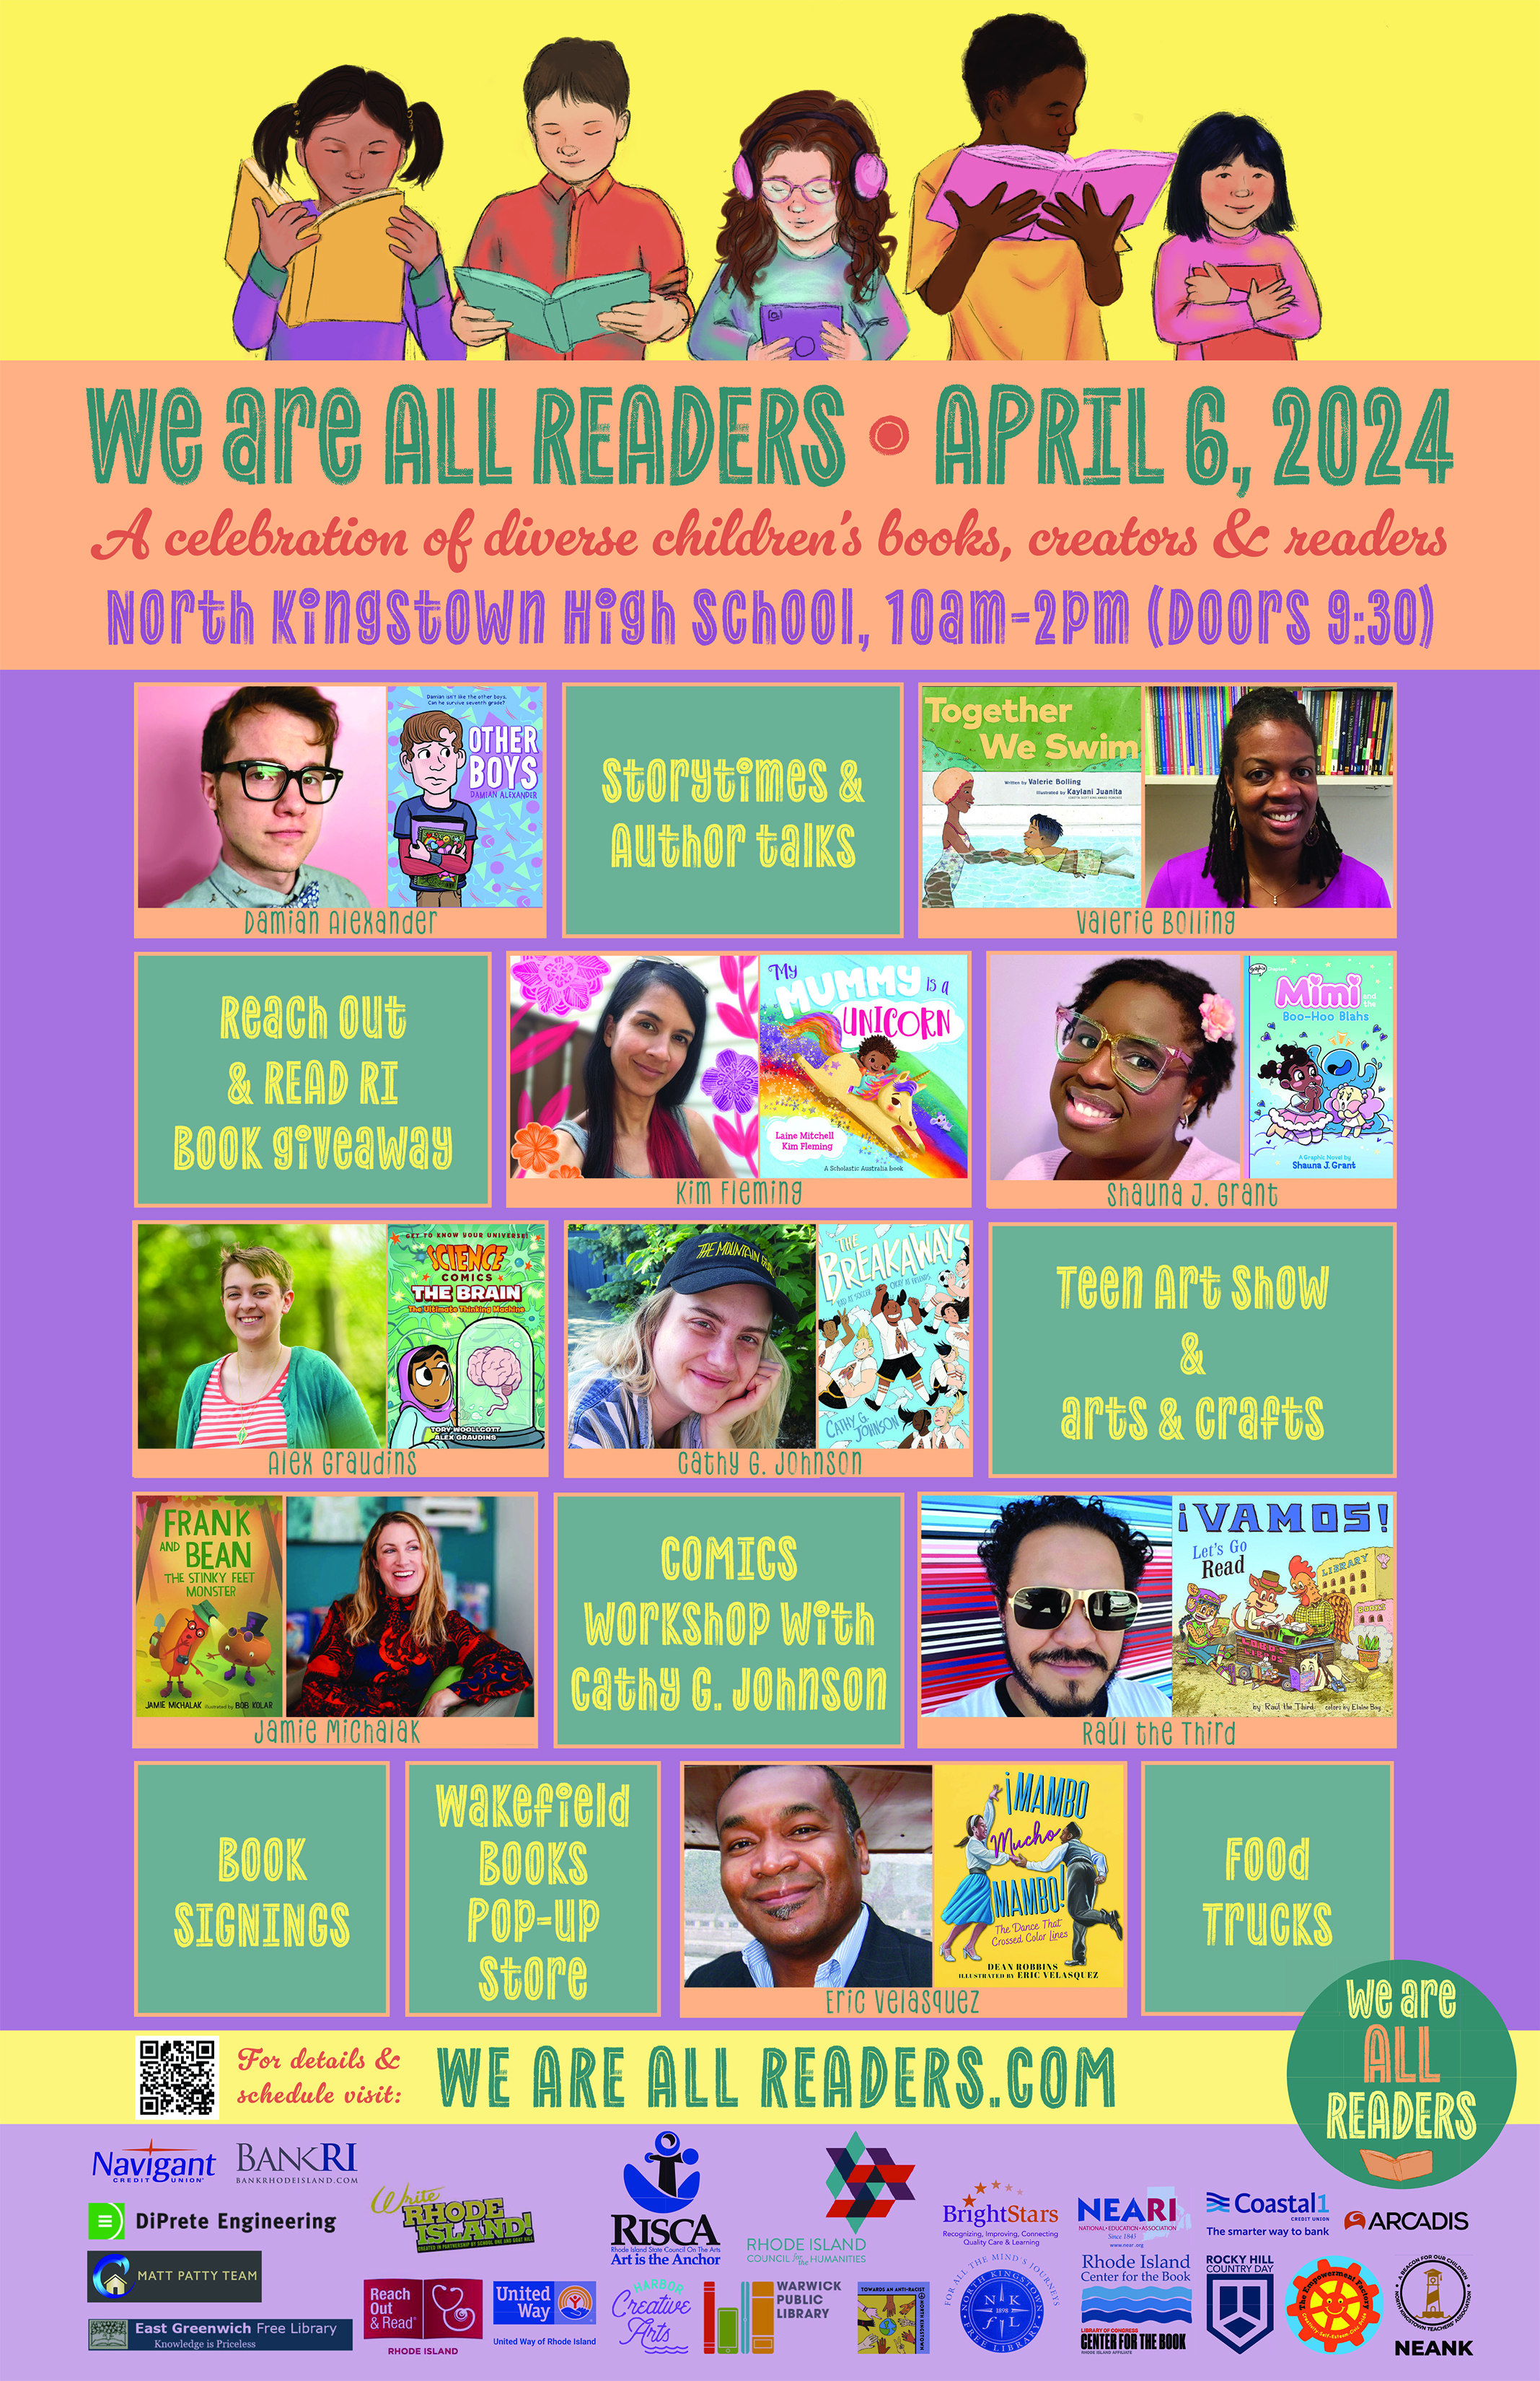 We are all readers april 6, 2024 Event in English